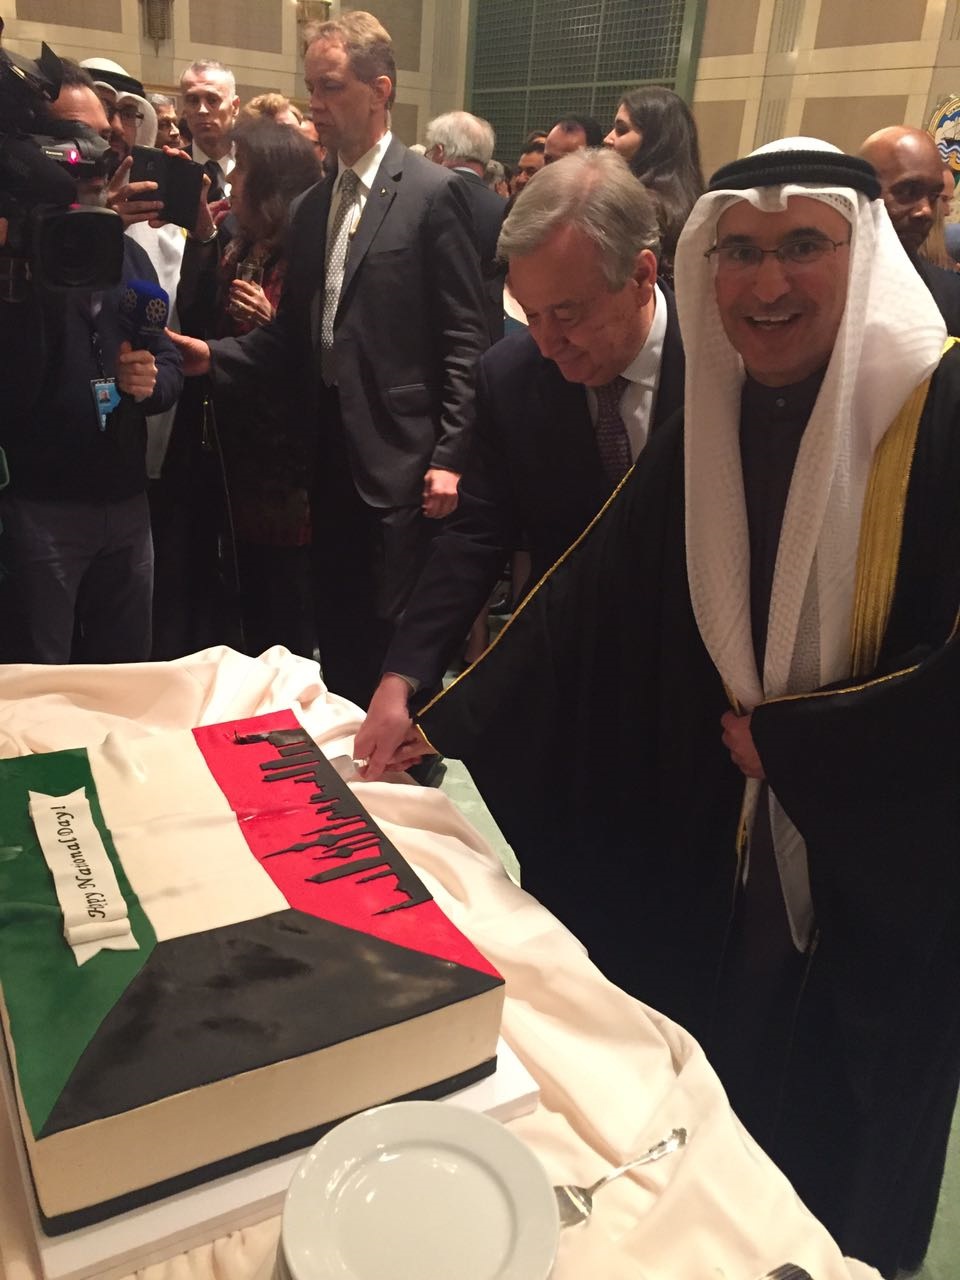 Kuwait Permanent Representative to the UN Ambassador Mansour Al-Otaibi hosted a large reception for diplomats commemorating the country's 56th National Day, the 26th liberation day and the 11th